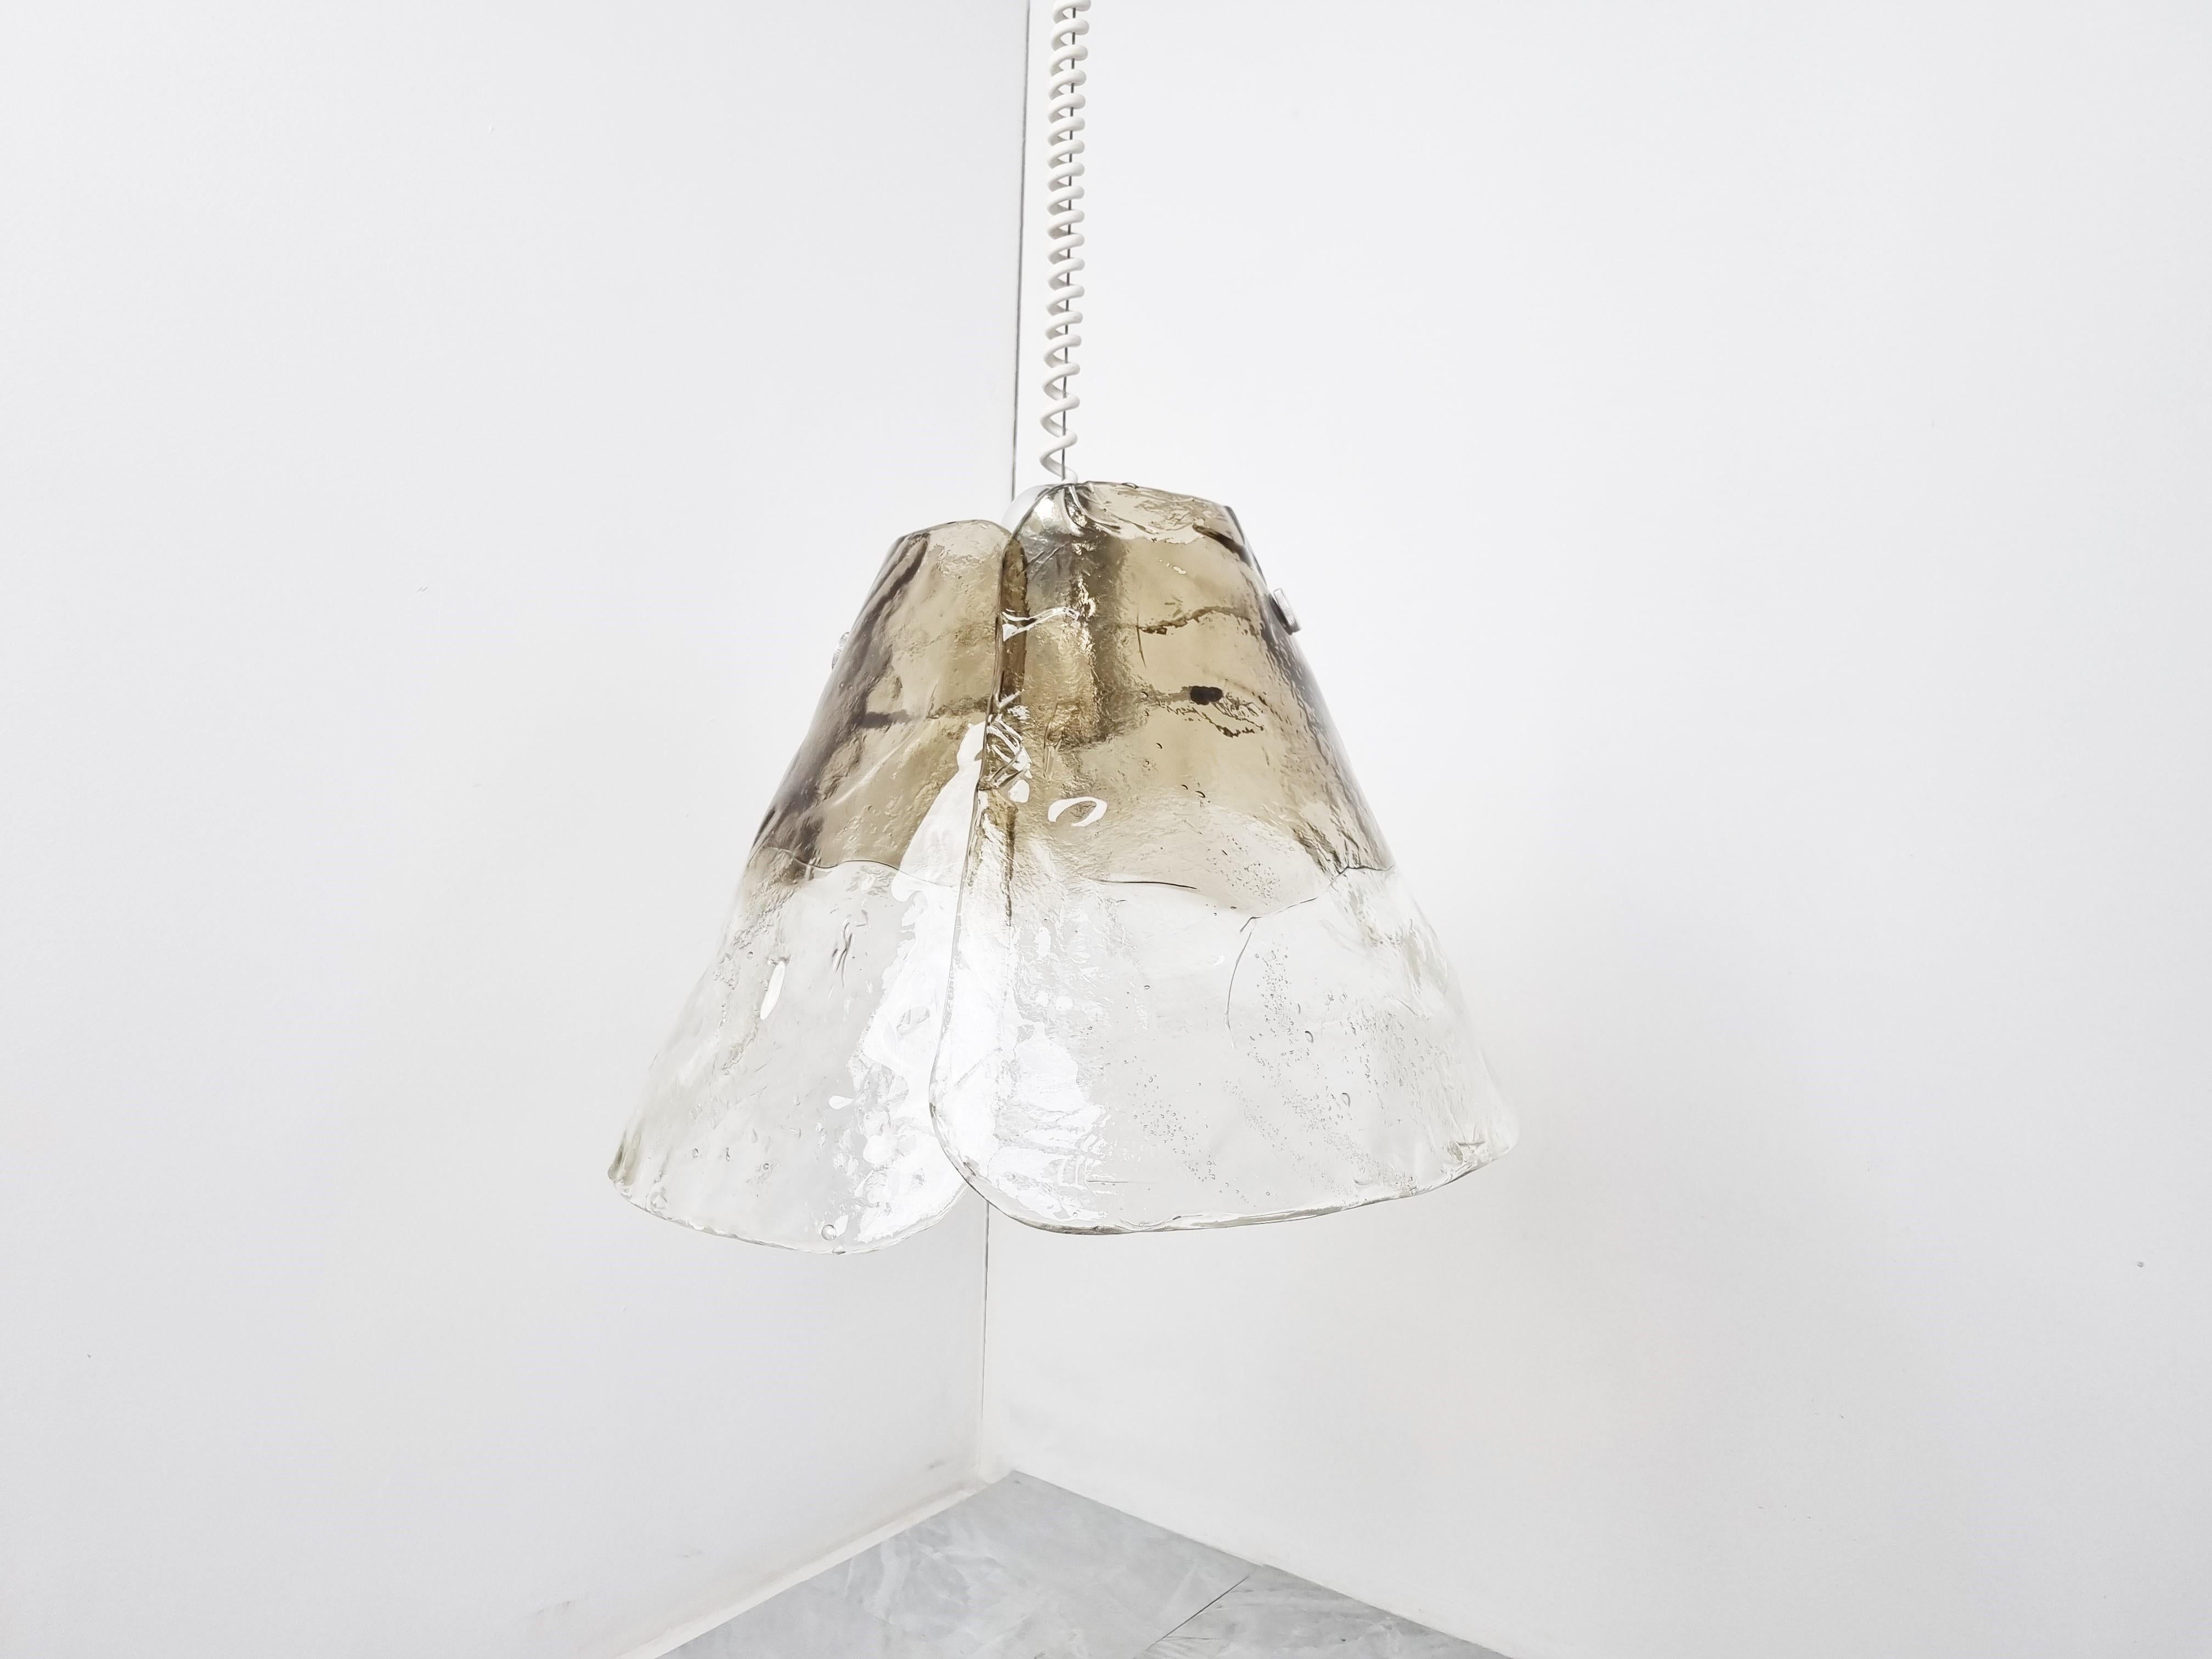 Mid century smoked glass pendant light by JT Kalmar for Franken KG.

This lamp was inspired by Carlo Nason who designed similar lamps for Mazzega.

The hand made smoked glass shades create a warm diffuse light.

Works with a single E27 light